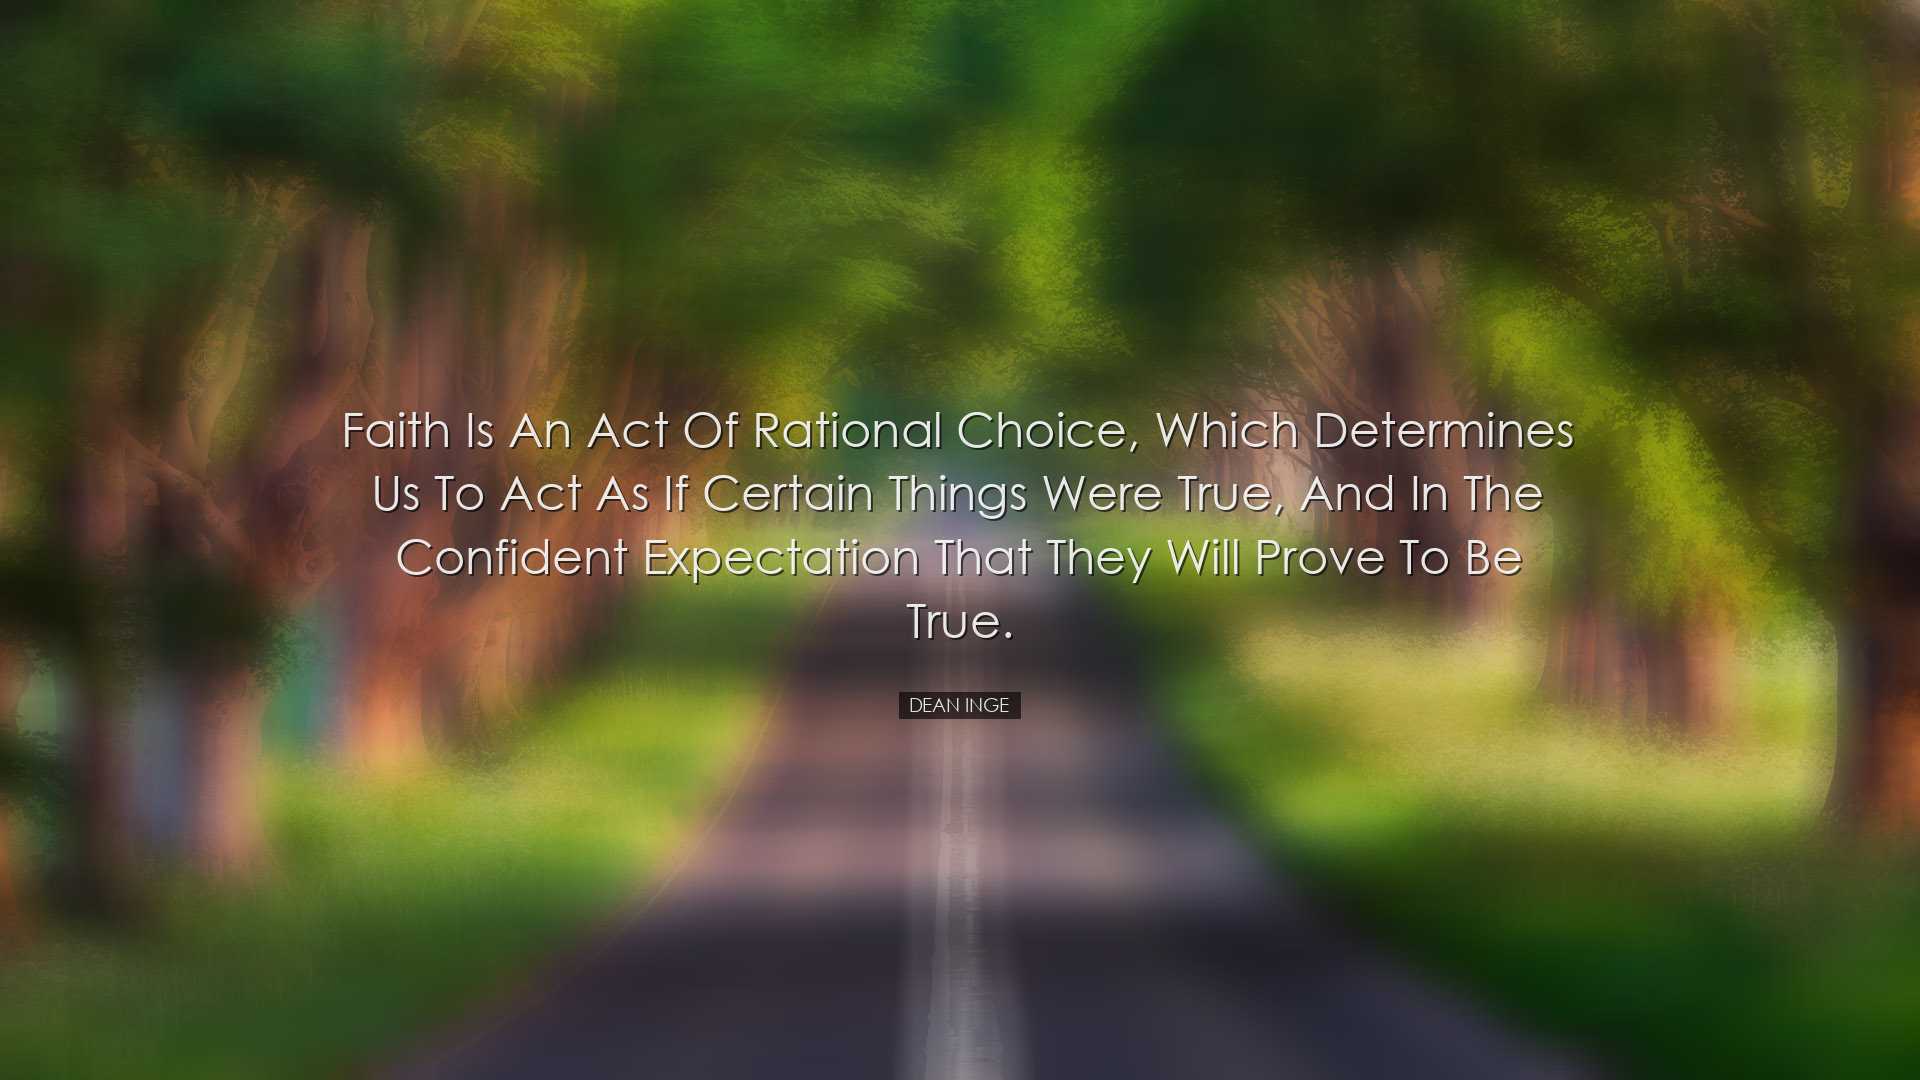 Faith is an act of rational choice, which determines us to act as